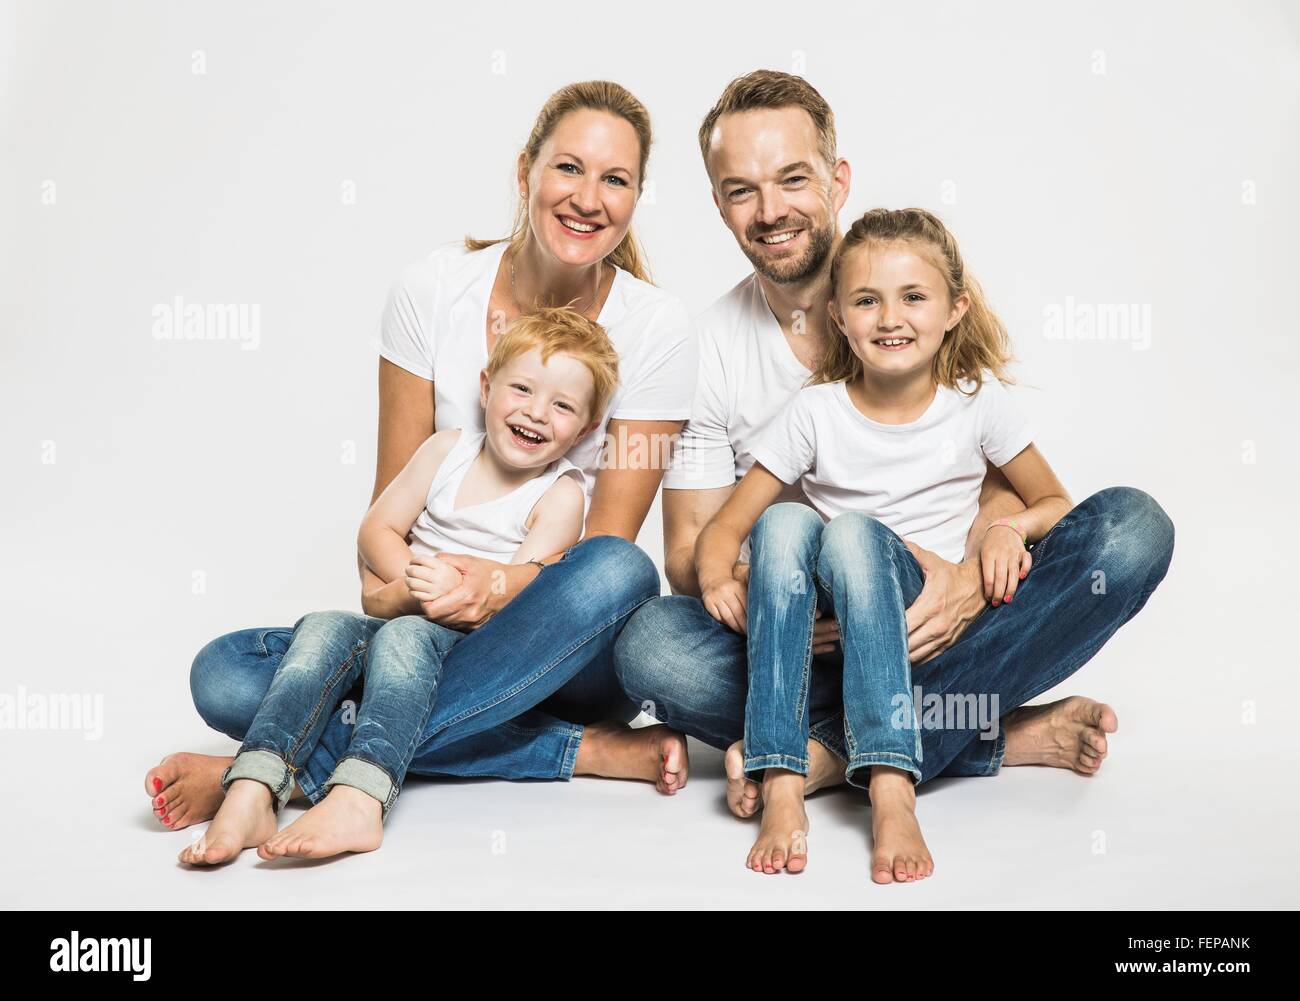 Studio portrait of boy and girl with mature parents sitting on floor Stock Photo